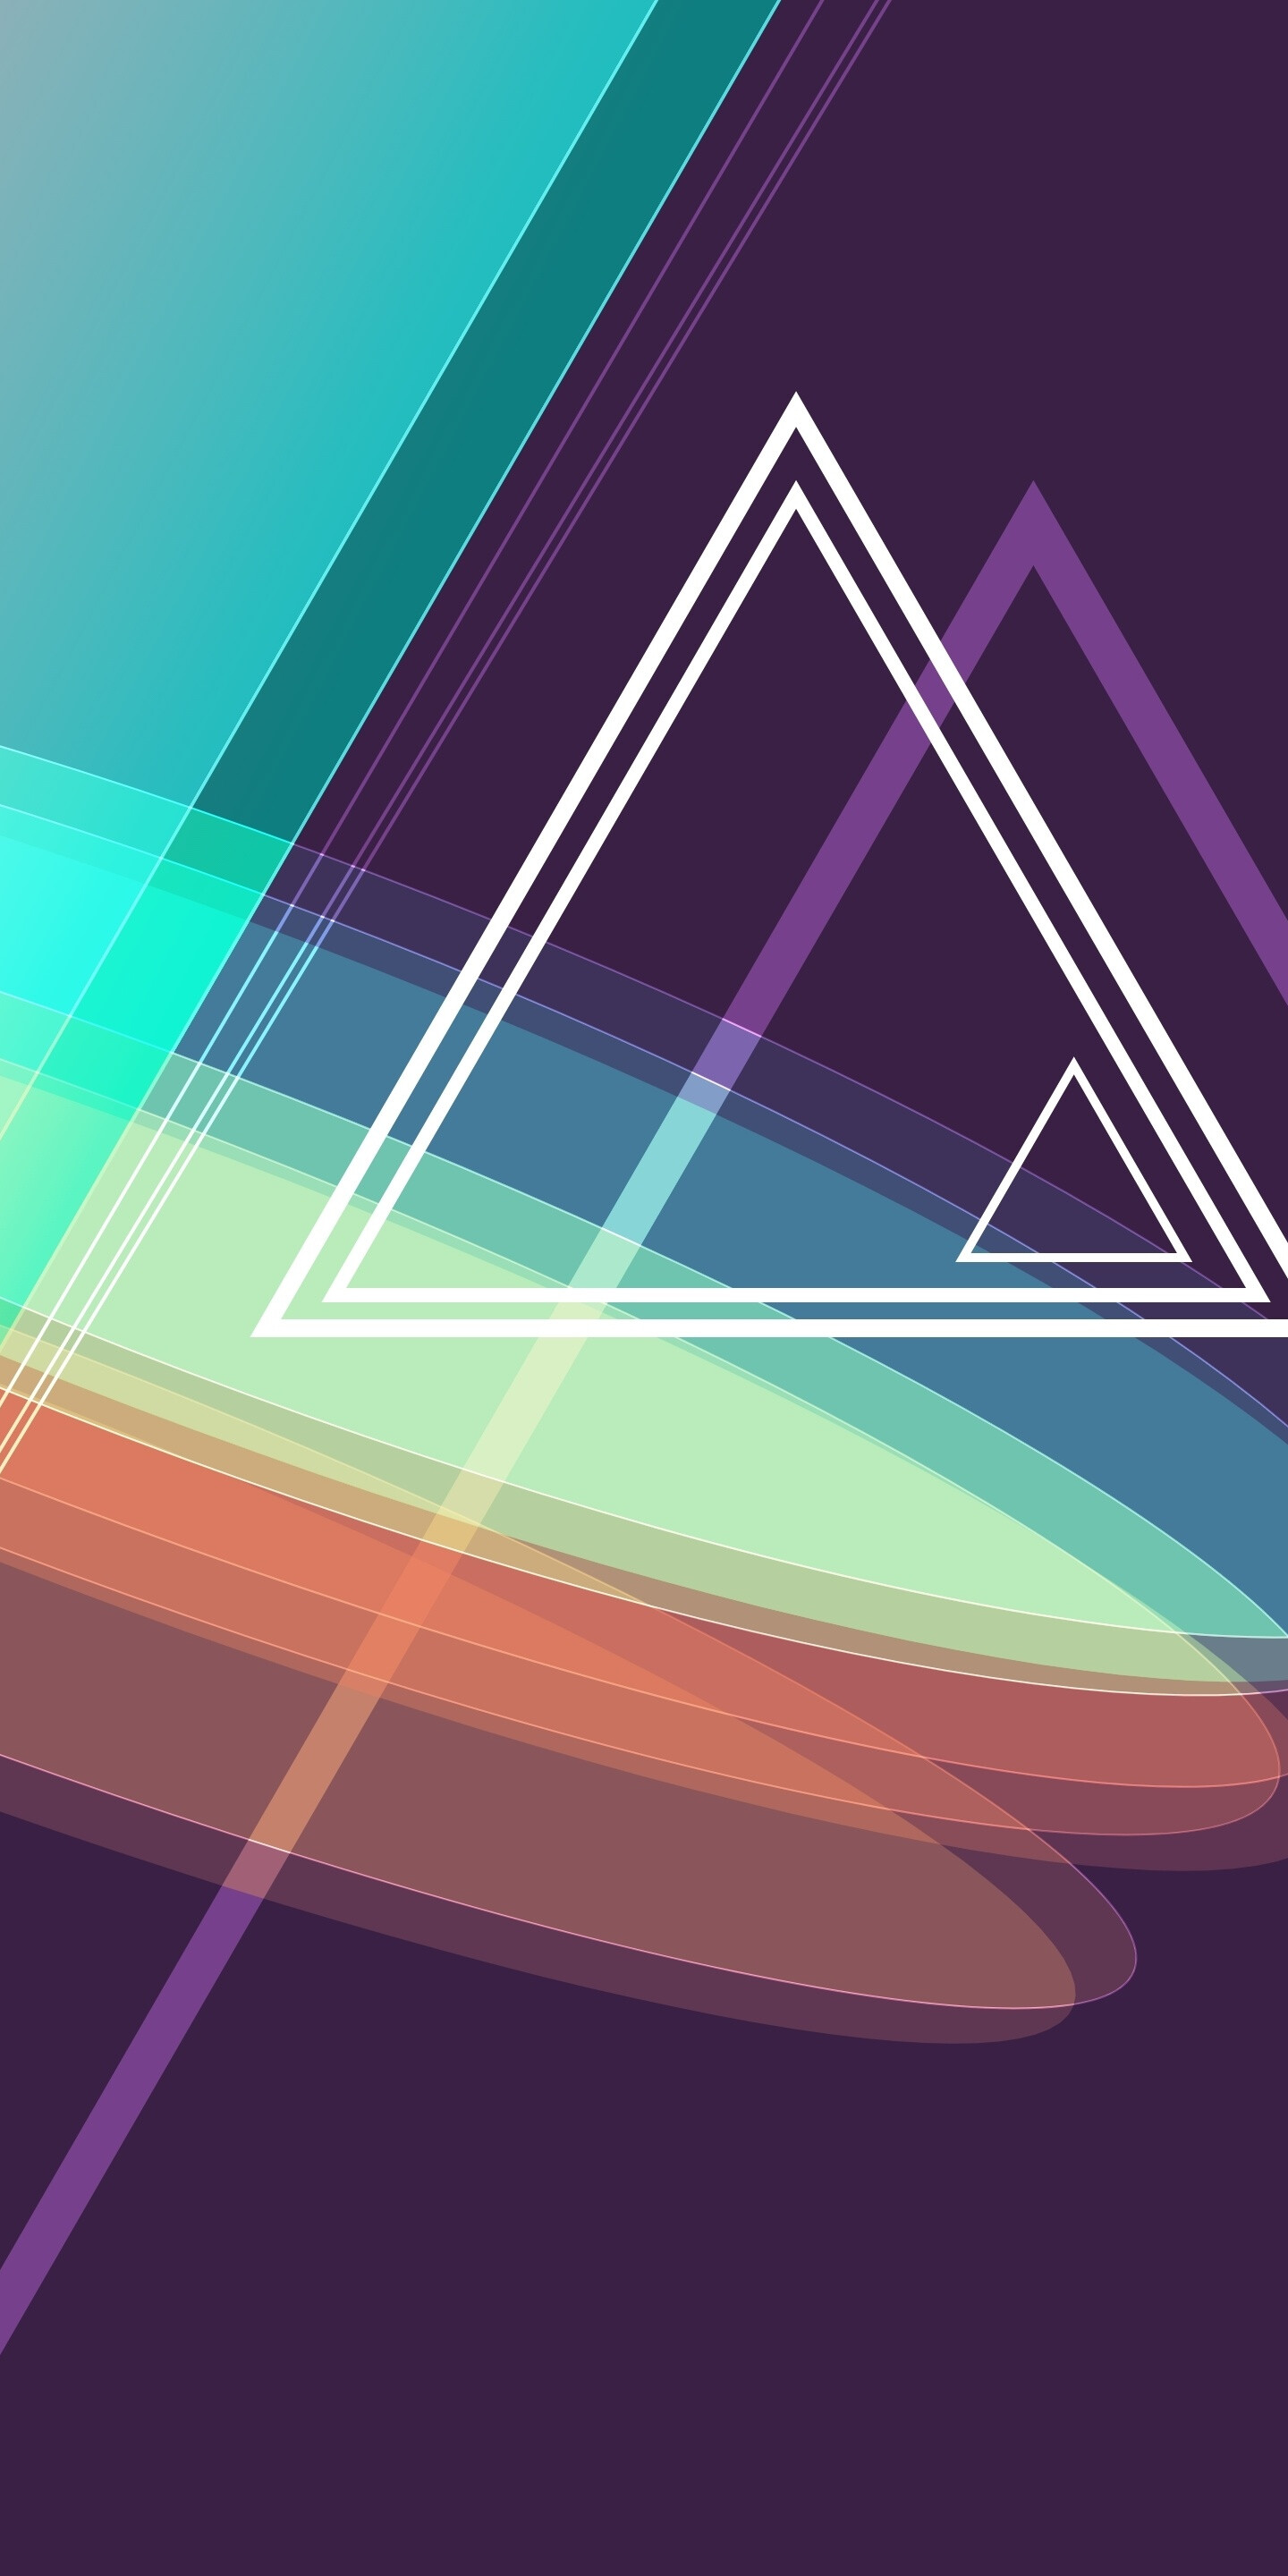 Geometric Abstract: Triangles, Pyramids, Colorful shapes, Ovals. 1440x2880 HD Background.